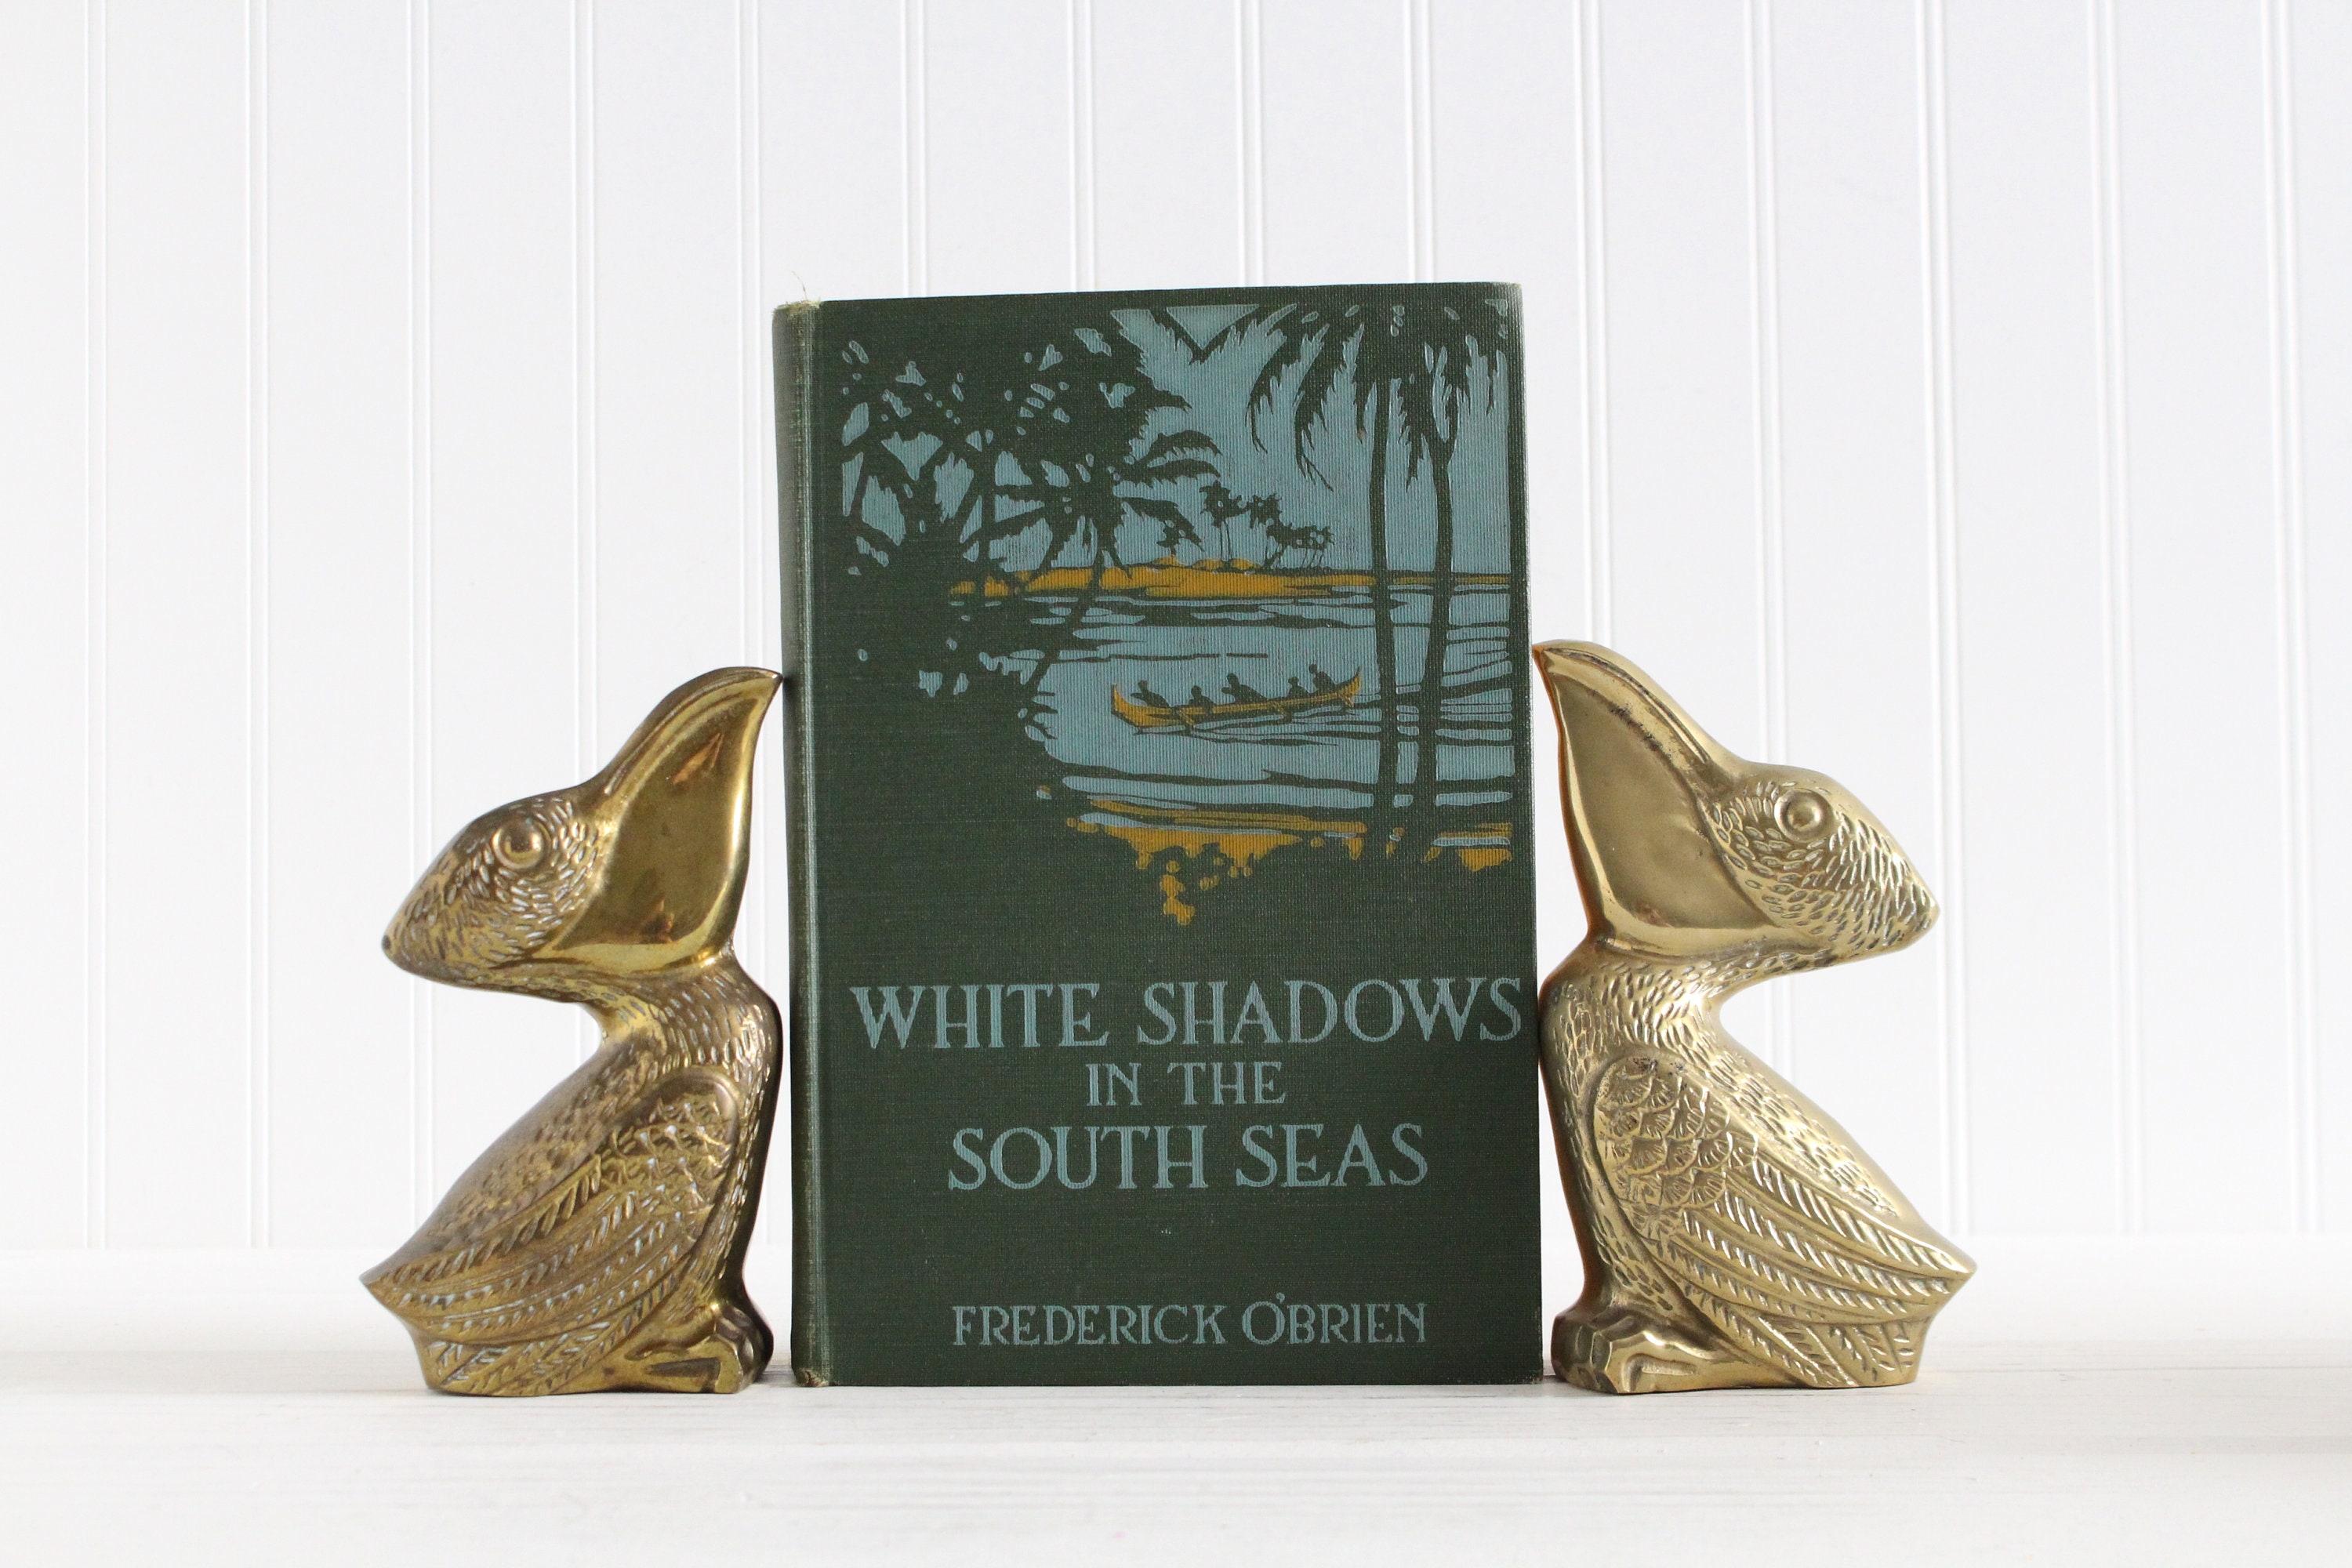 Solid brass seashell bookends – Turquoise's Treasures